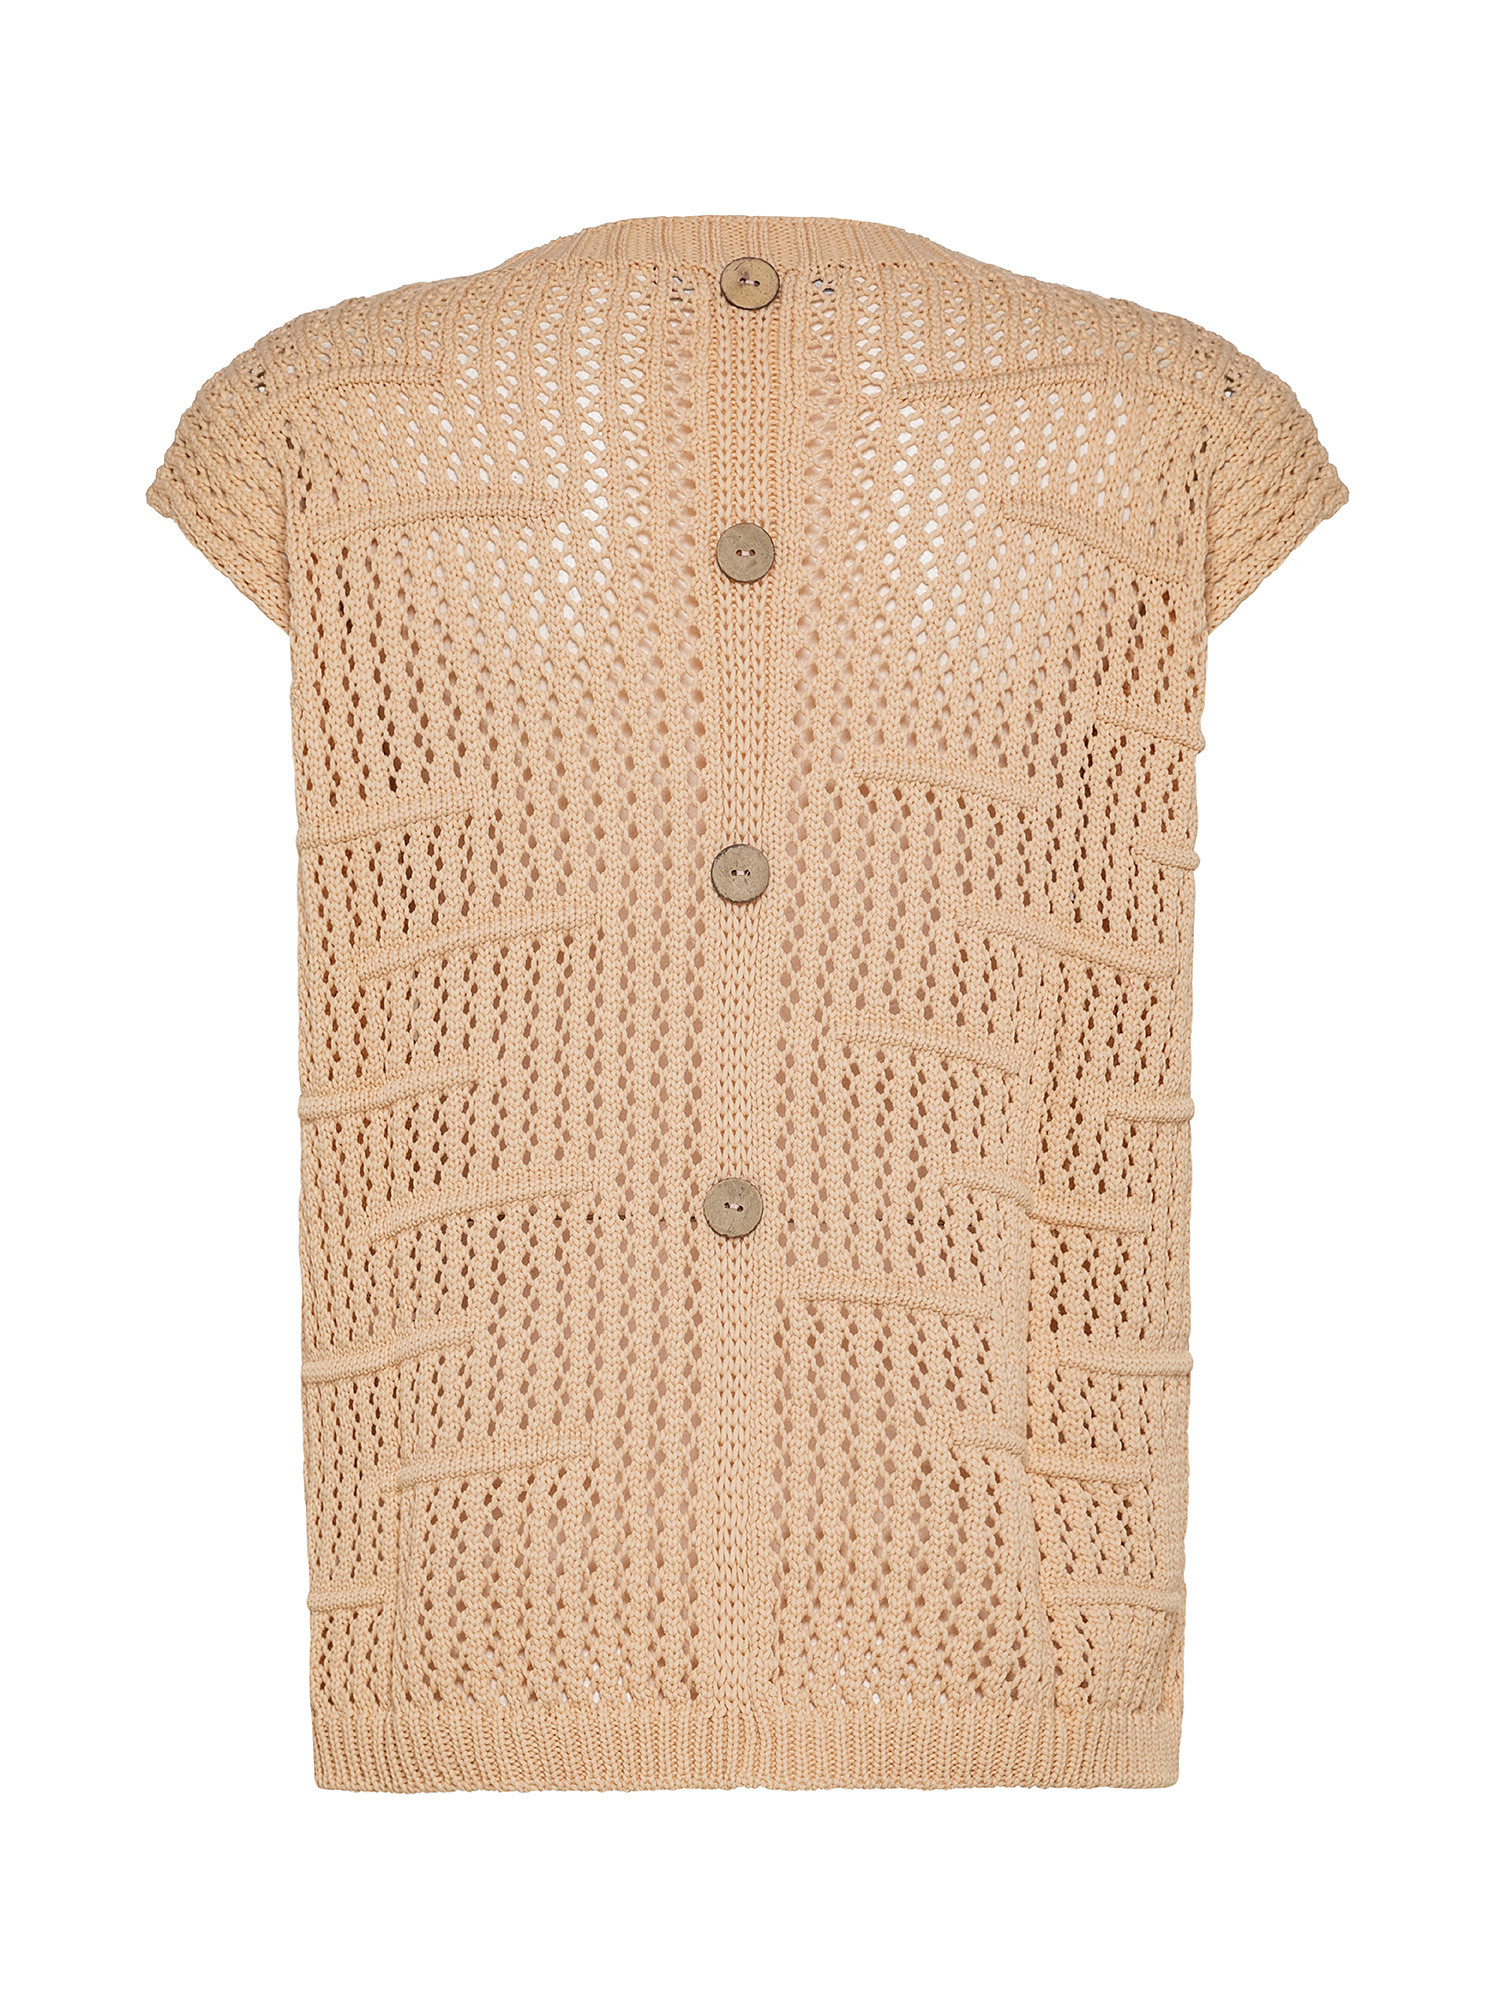 Tricot sweater, Beige, large image number 1